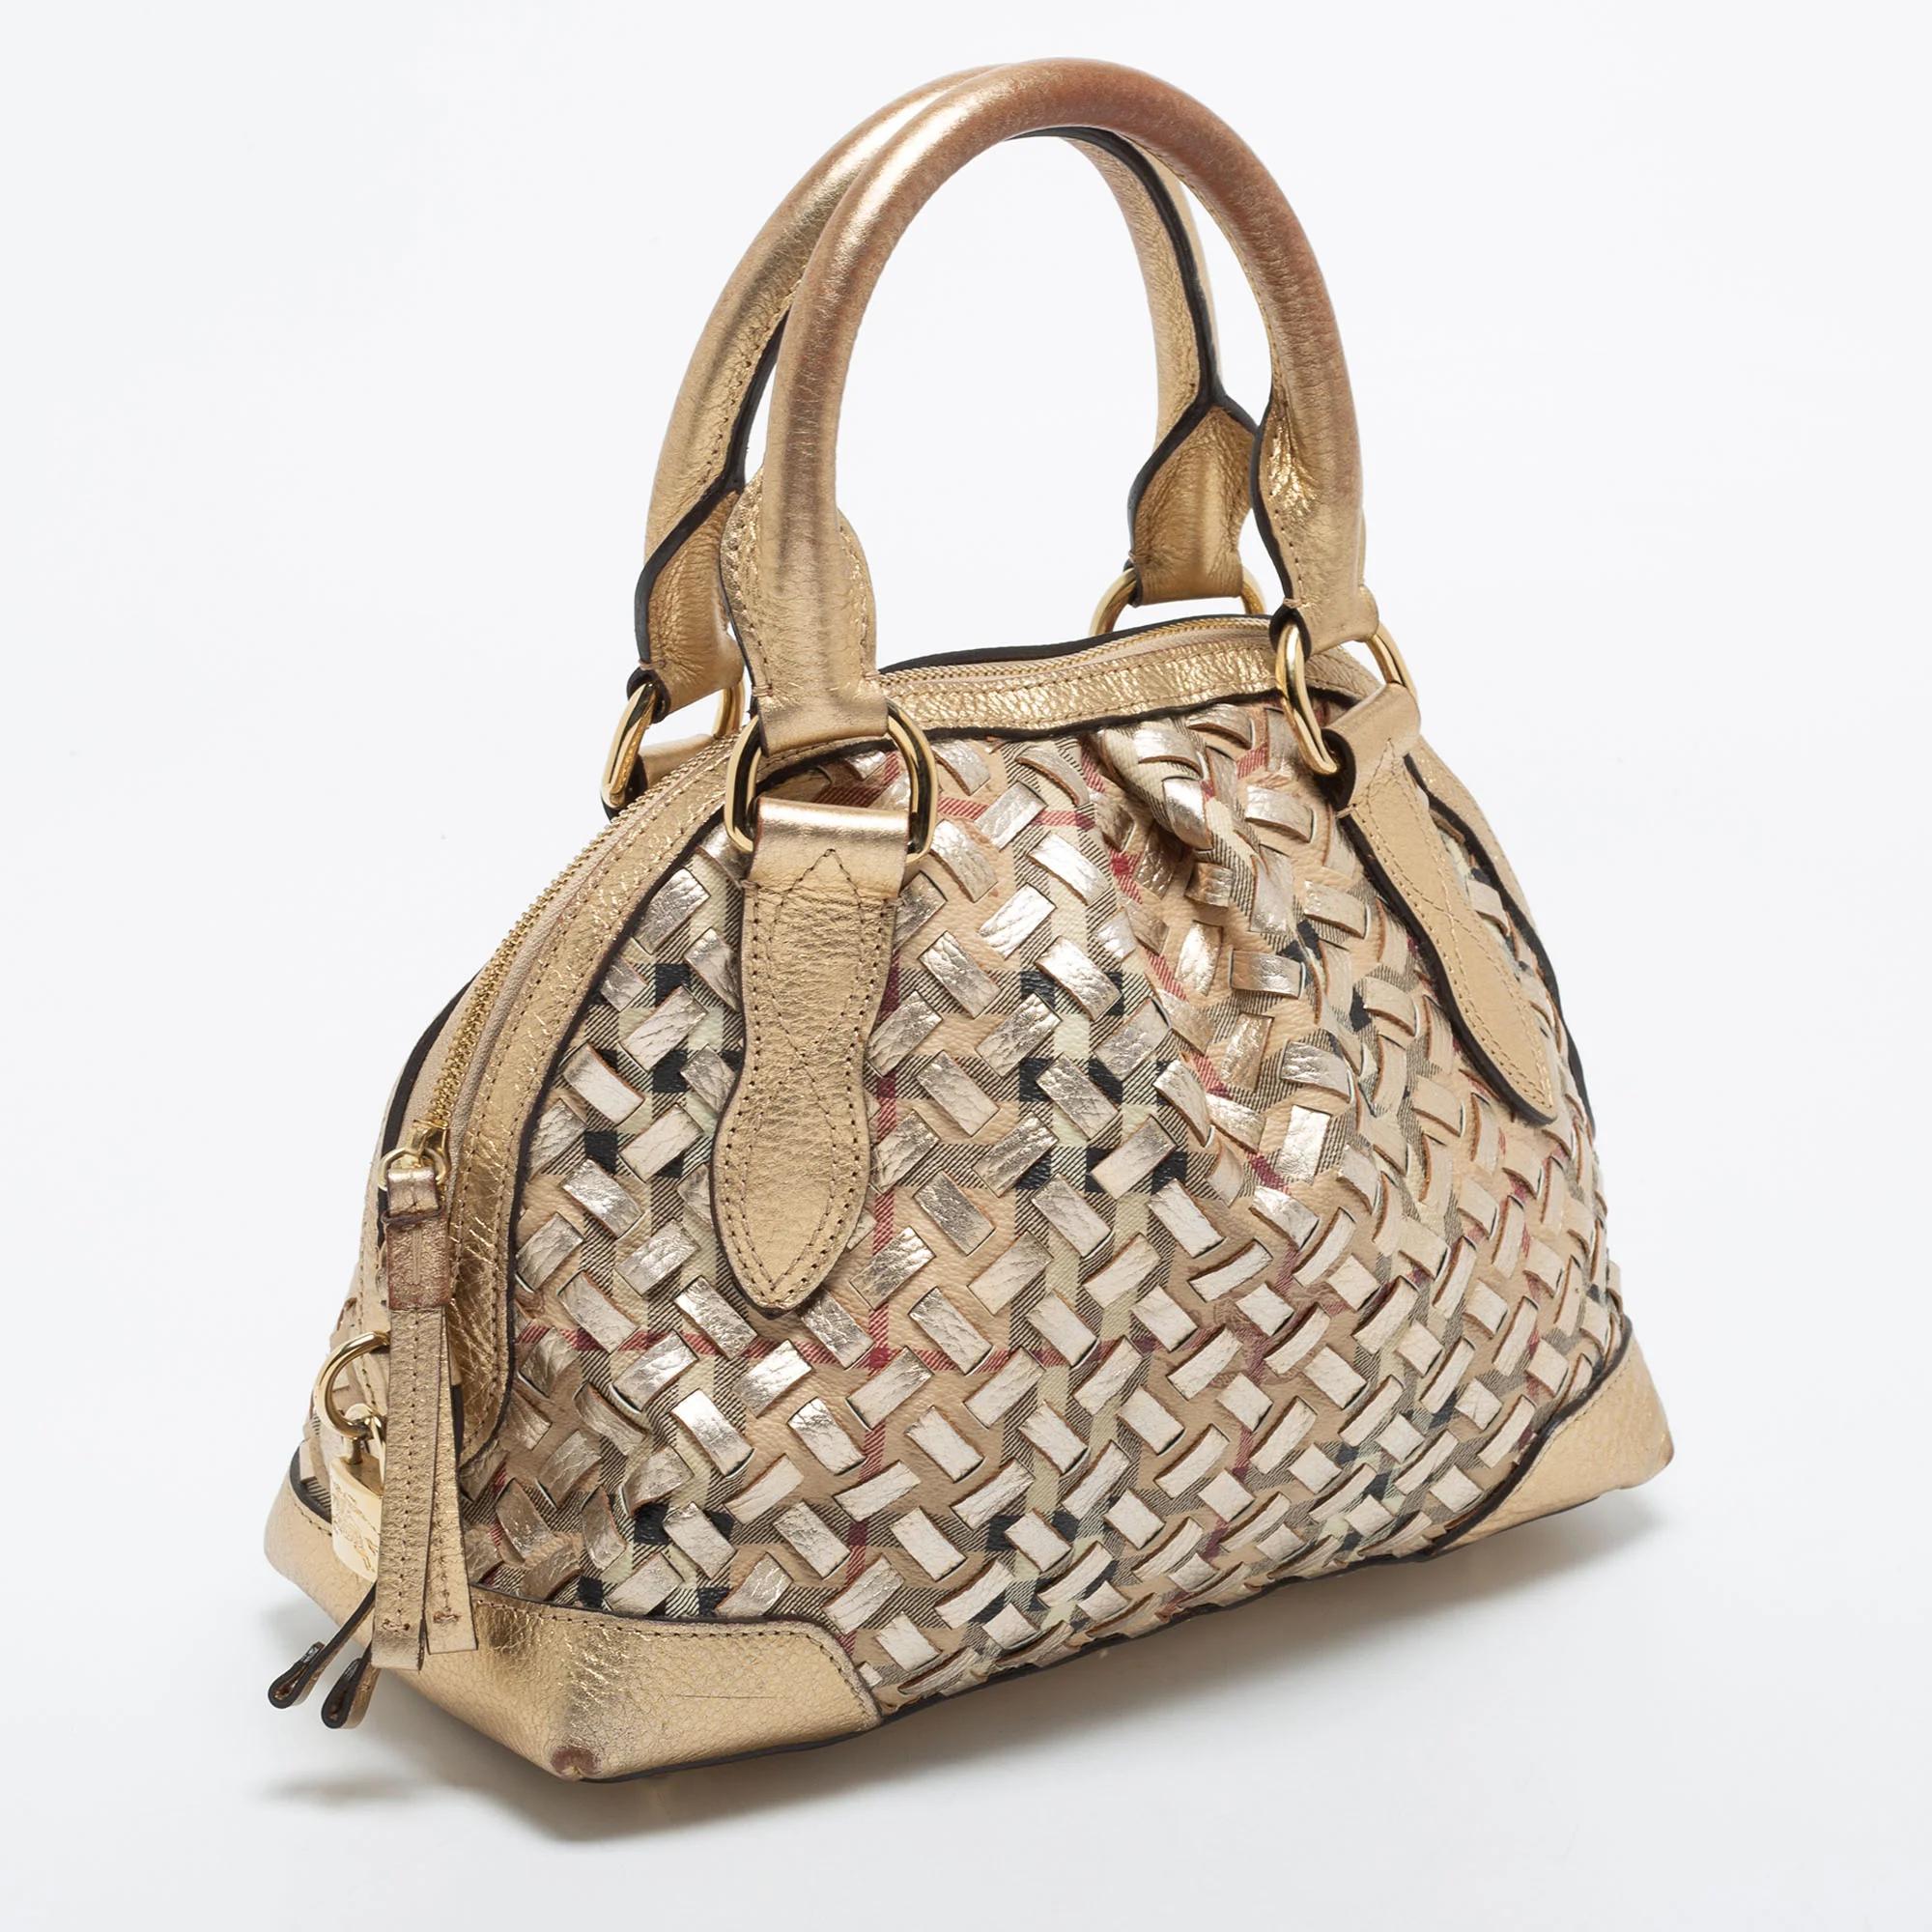 Burberry Metallic Gold Woven Haymarket Check Small Thornley Bag In Excellent Condition For Sale In Montreal, Quebec